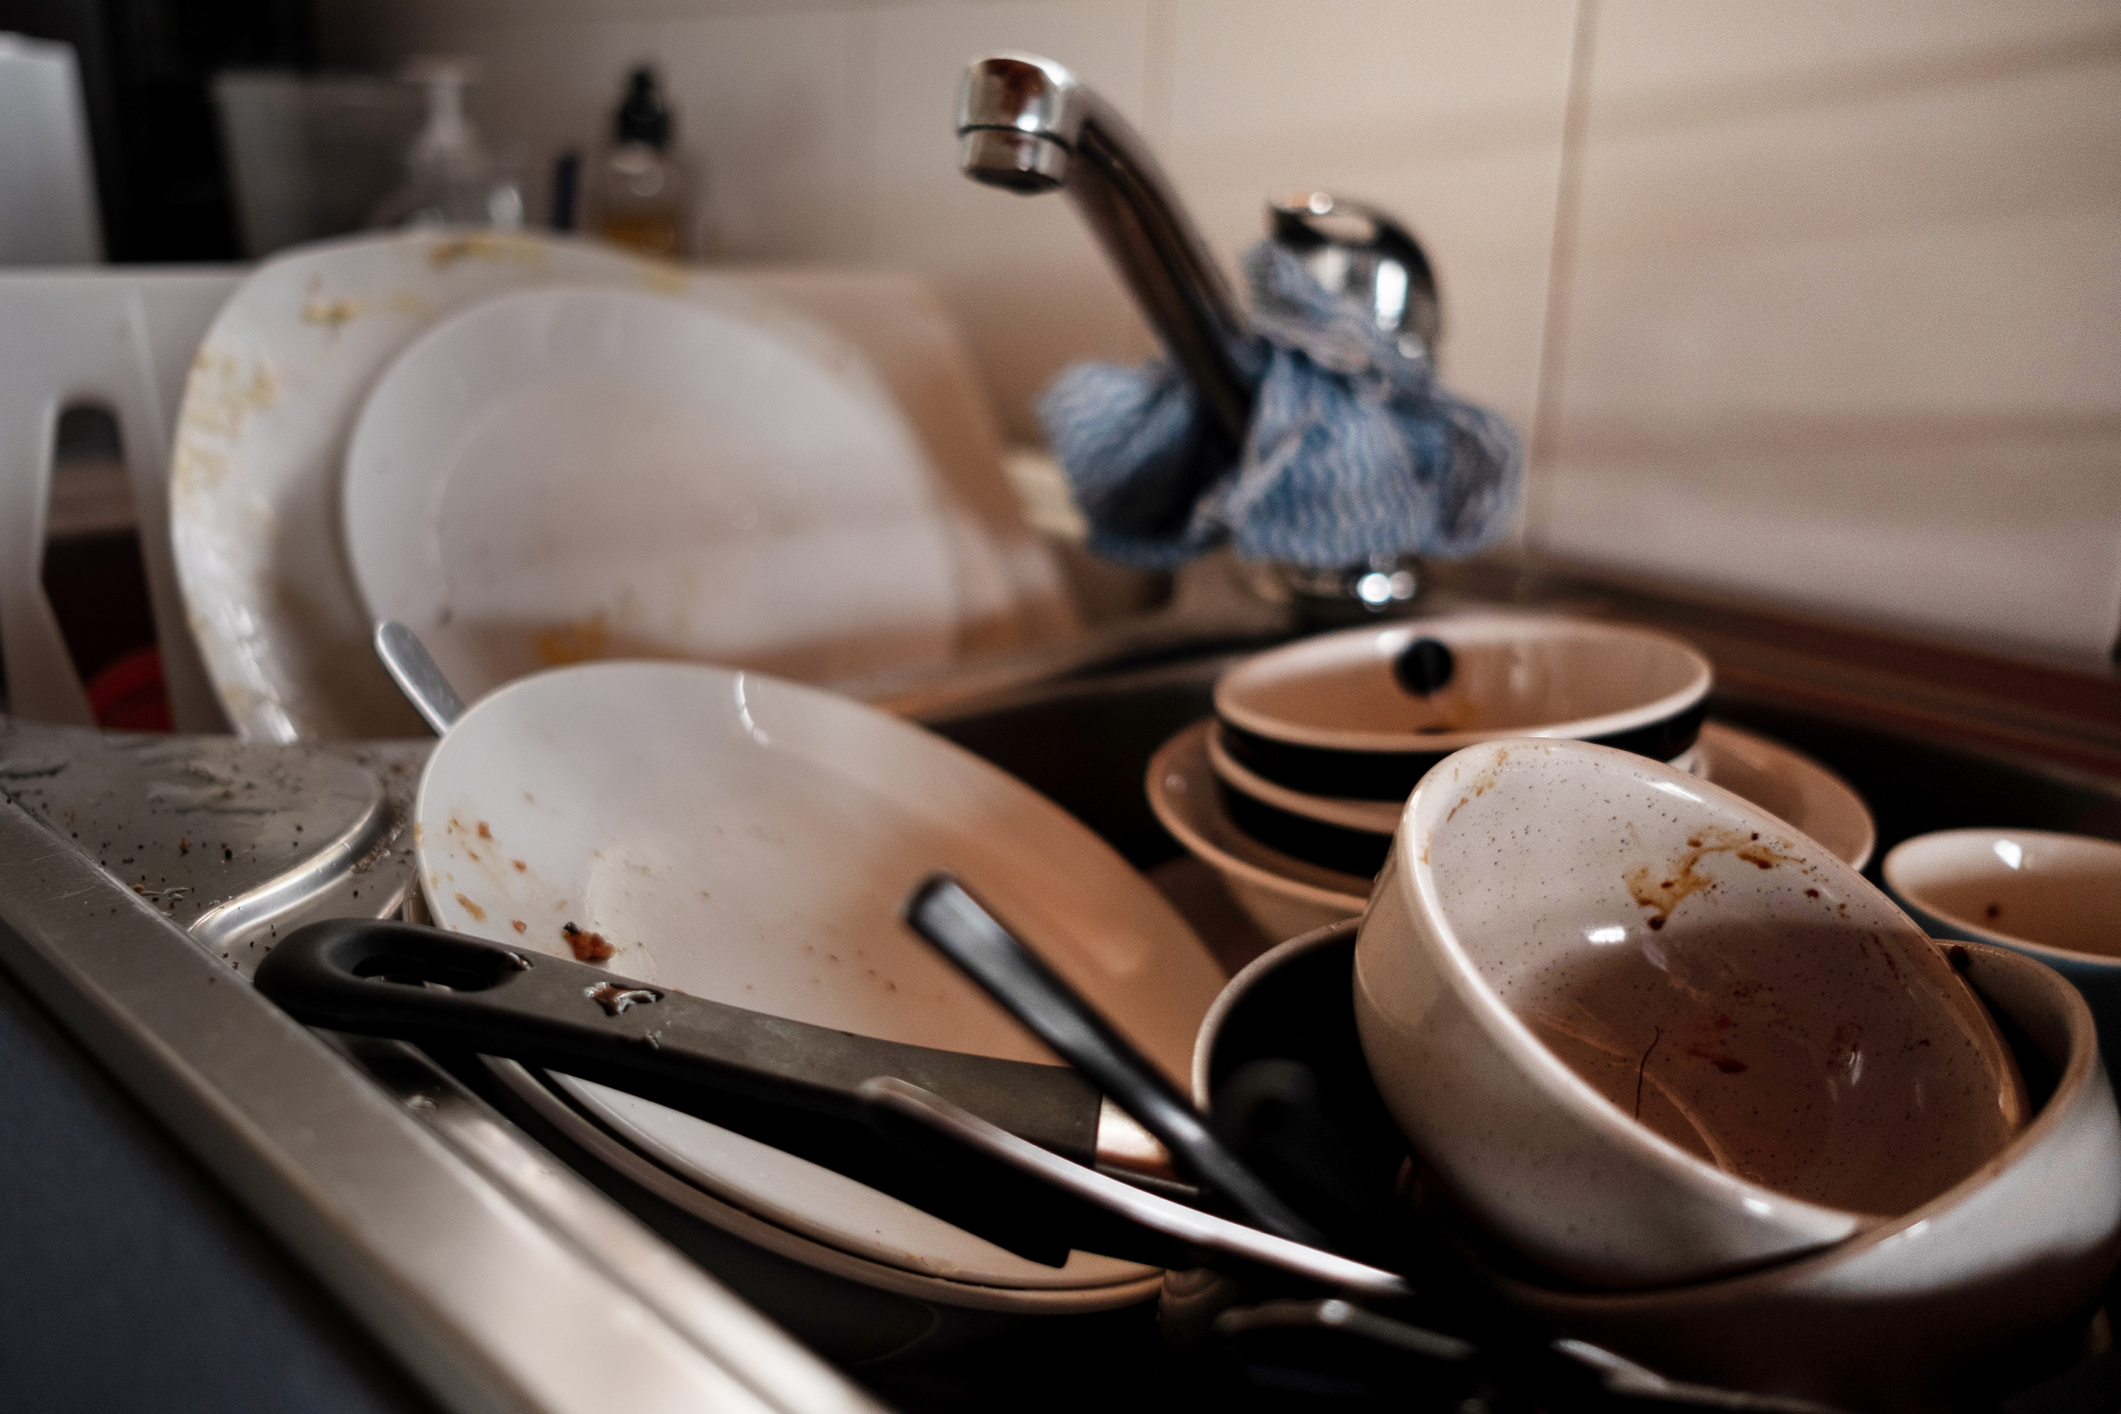 Dirty dishes. Грязная посуда глубокие тарелки. Unwashed dishes. Pile of Dirty dishes. Man with Dirty dishes.